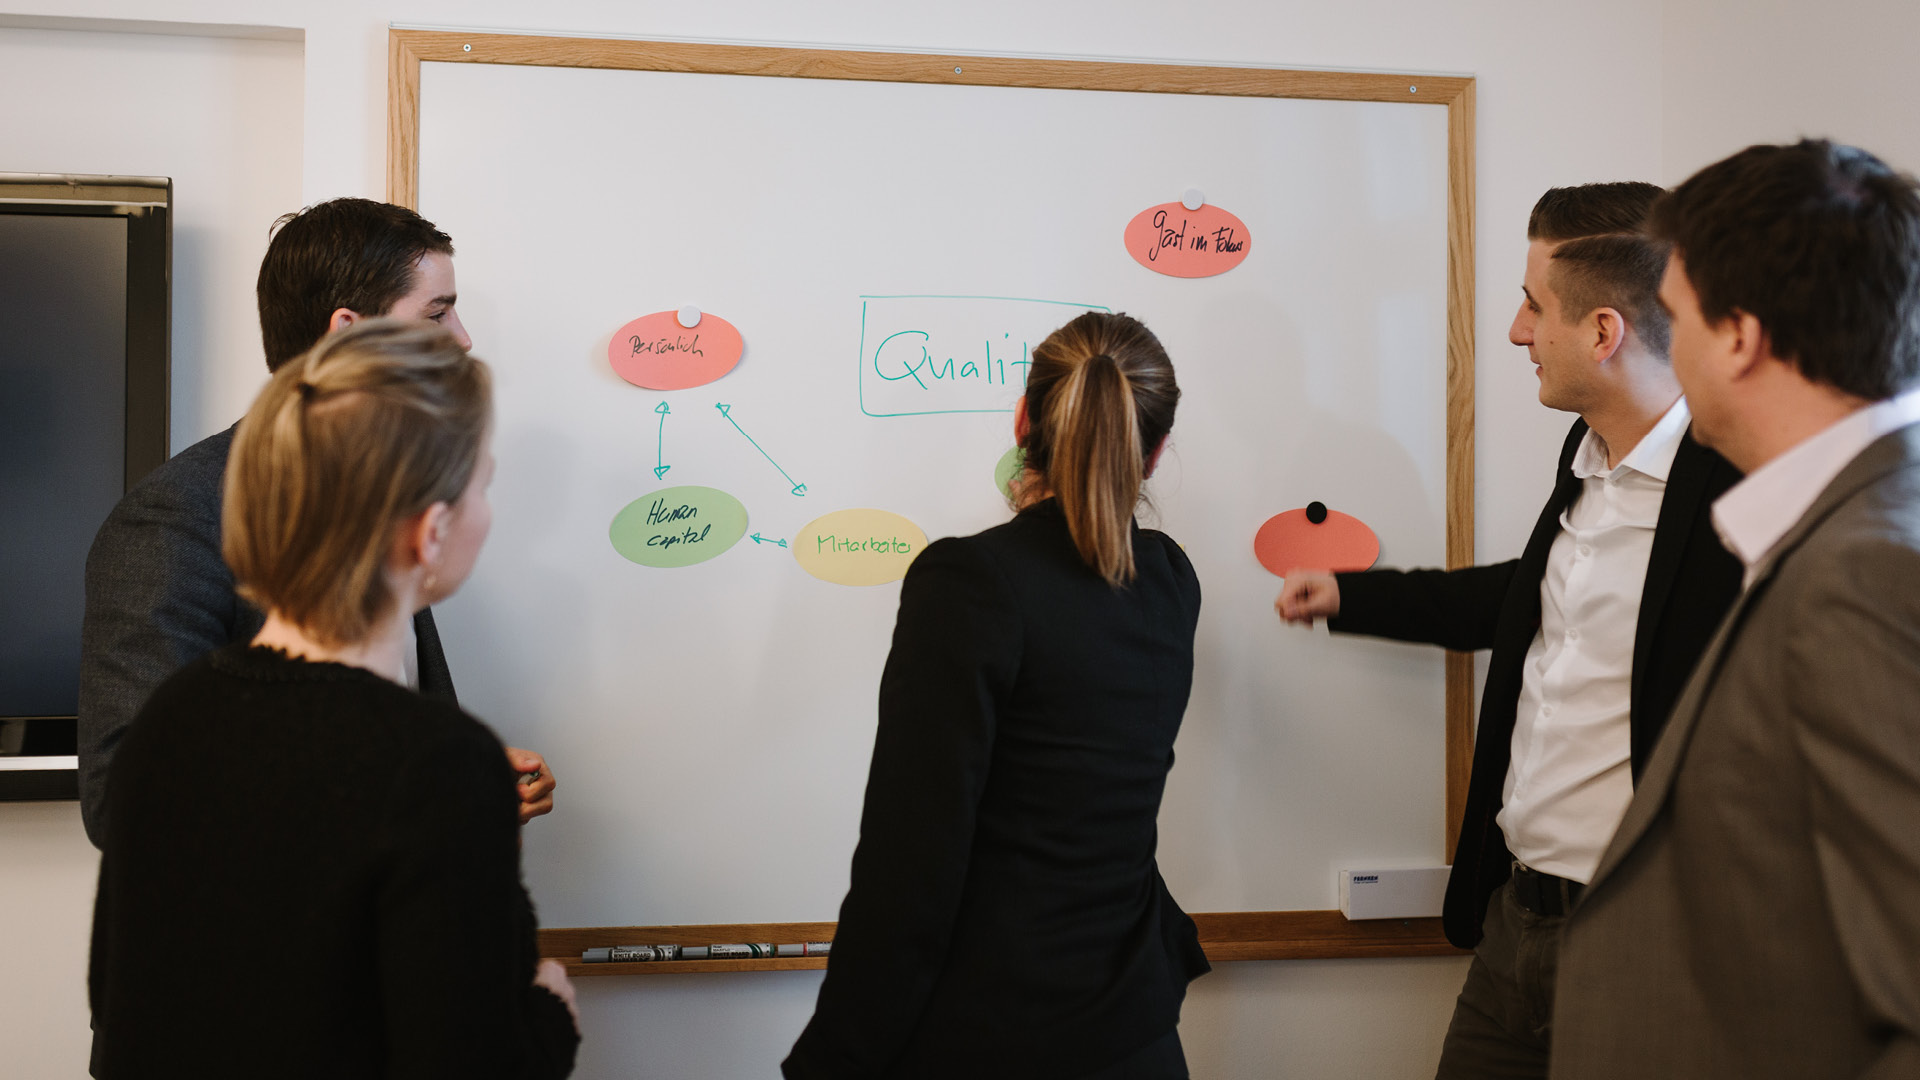 Group brainstorming at the whiteboard in the seminar room